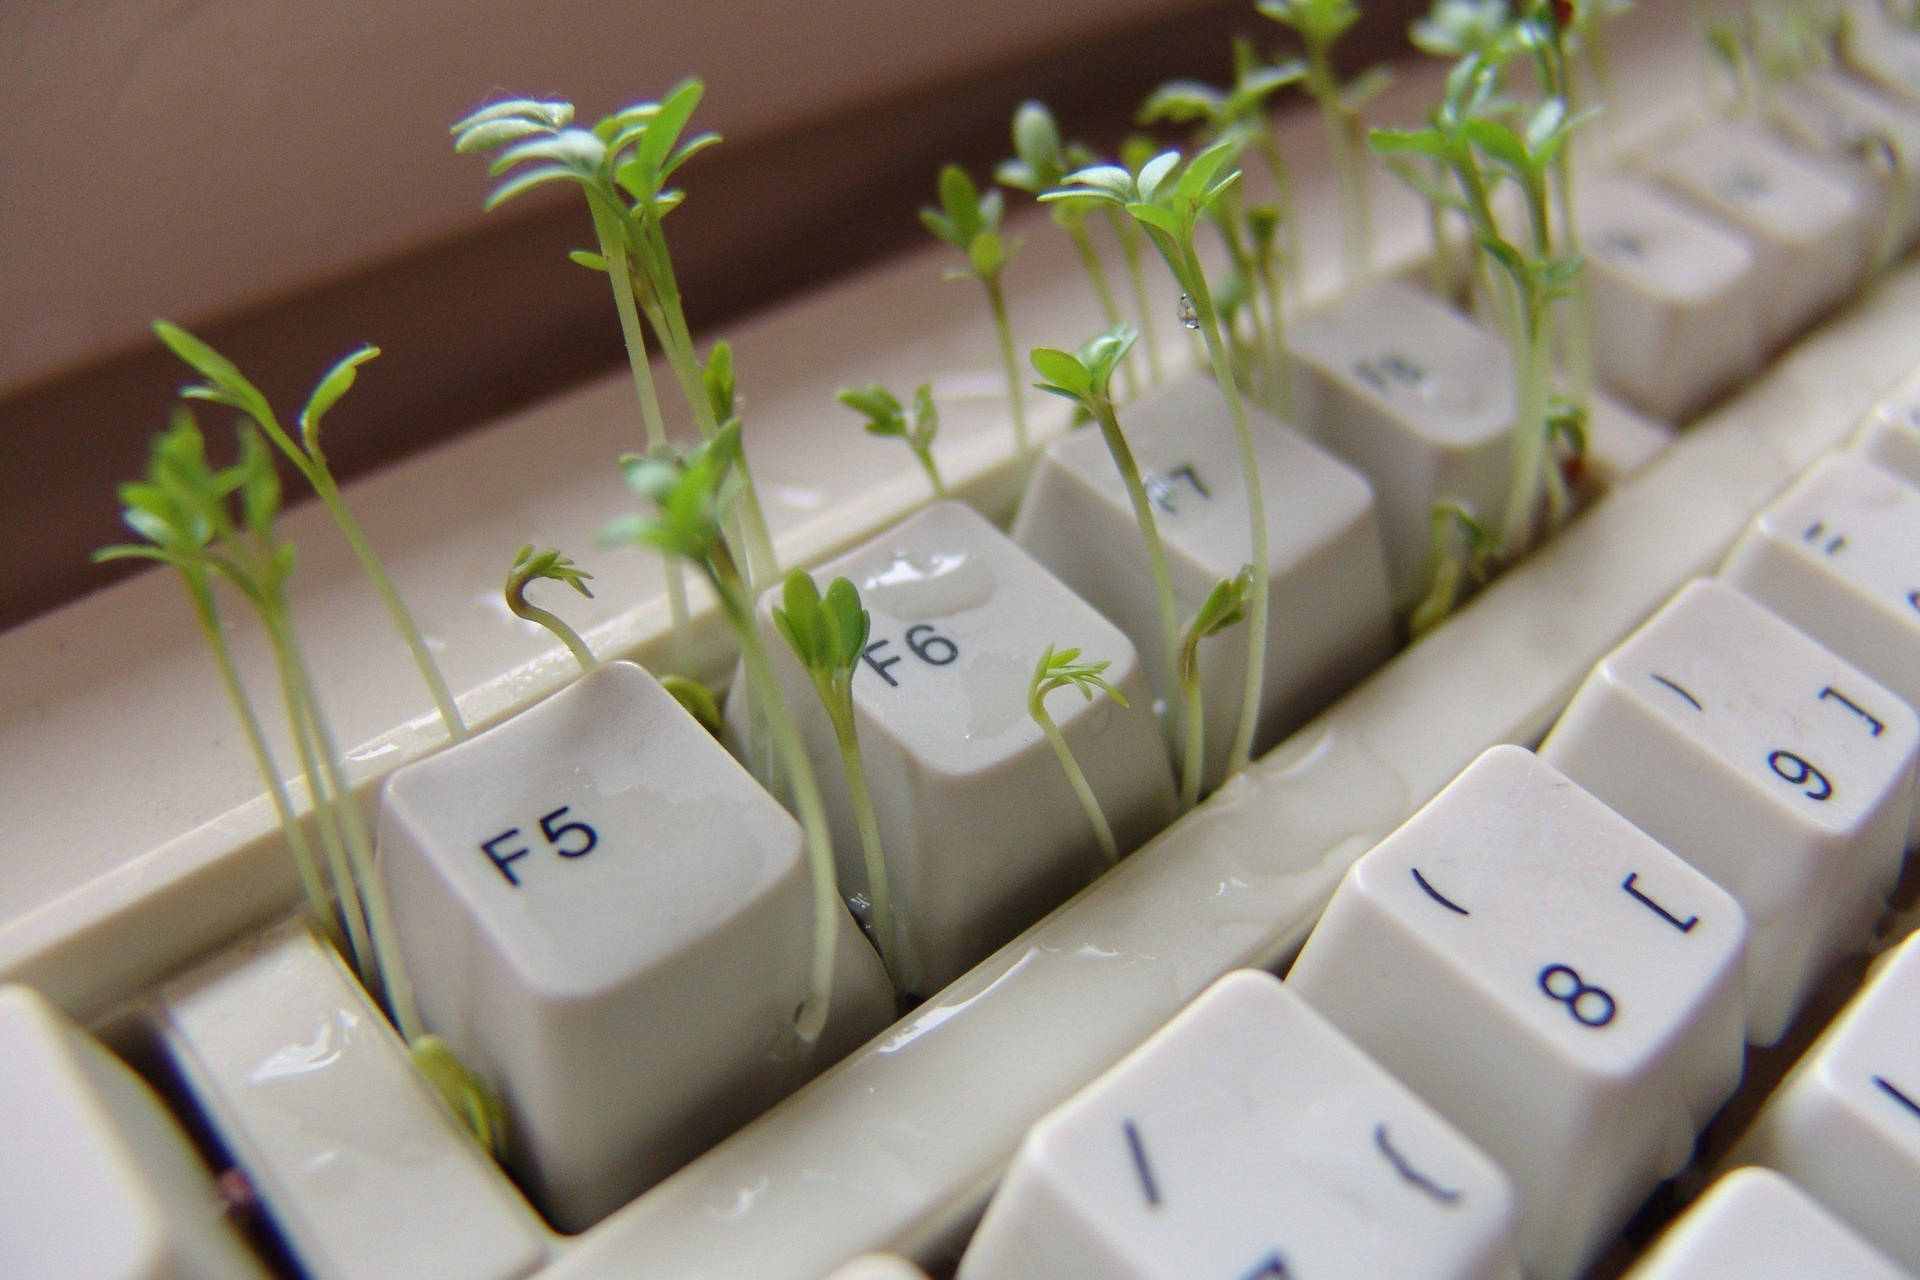 Sprouting Plant Keyboard Aesthetic Wallpaper